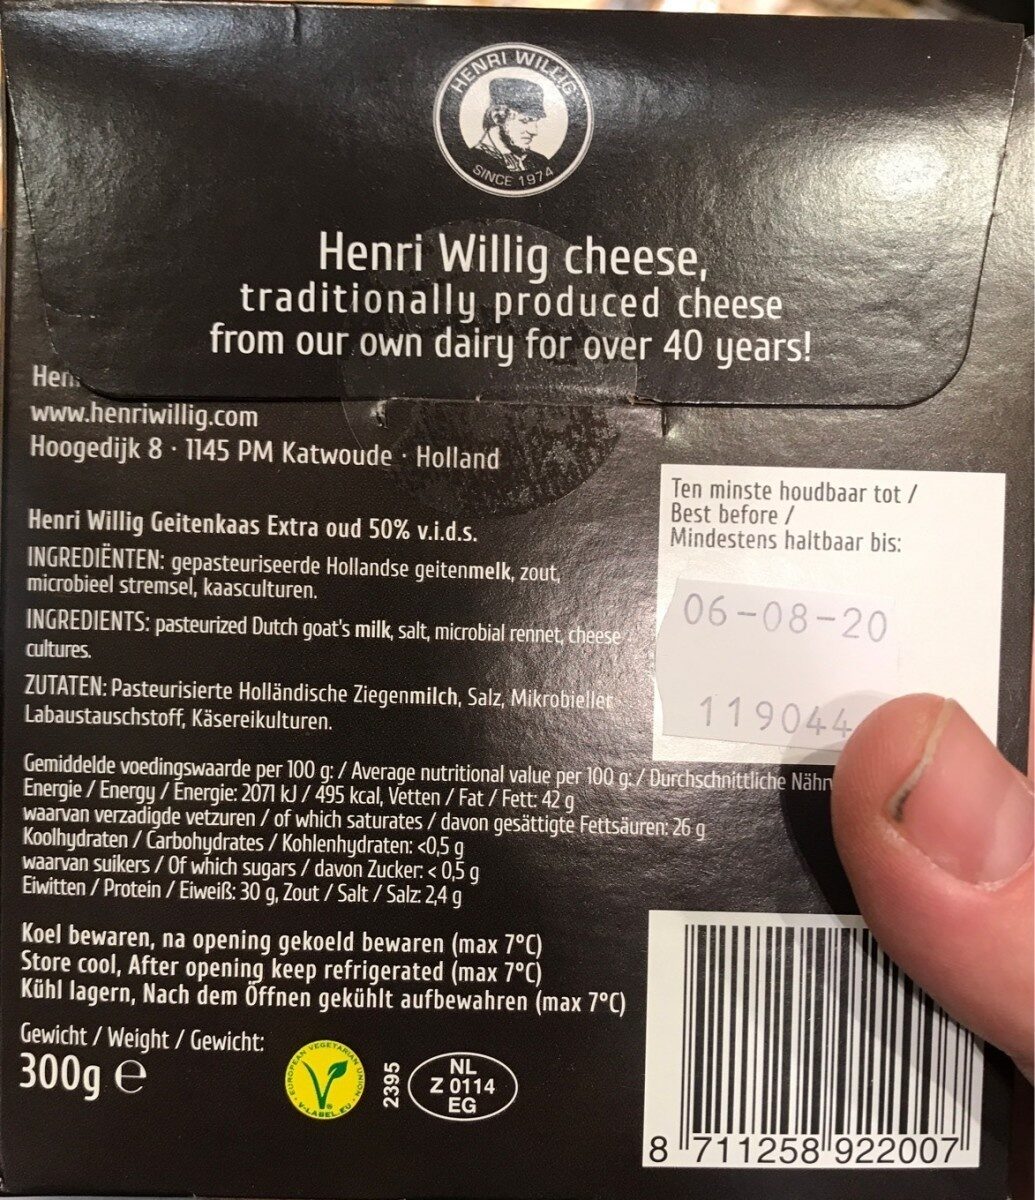 Goat cheese extra old - Nutrition facts - fr